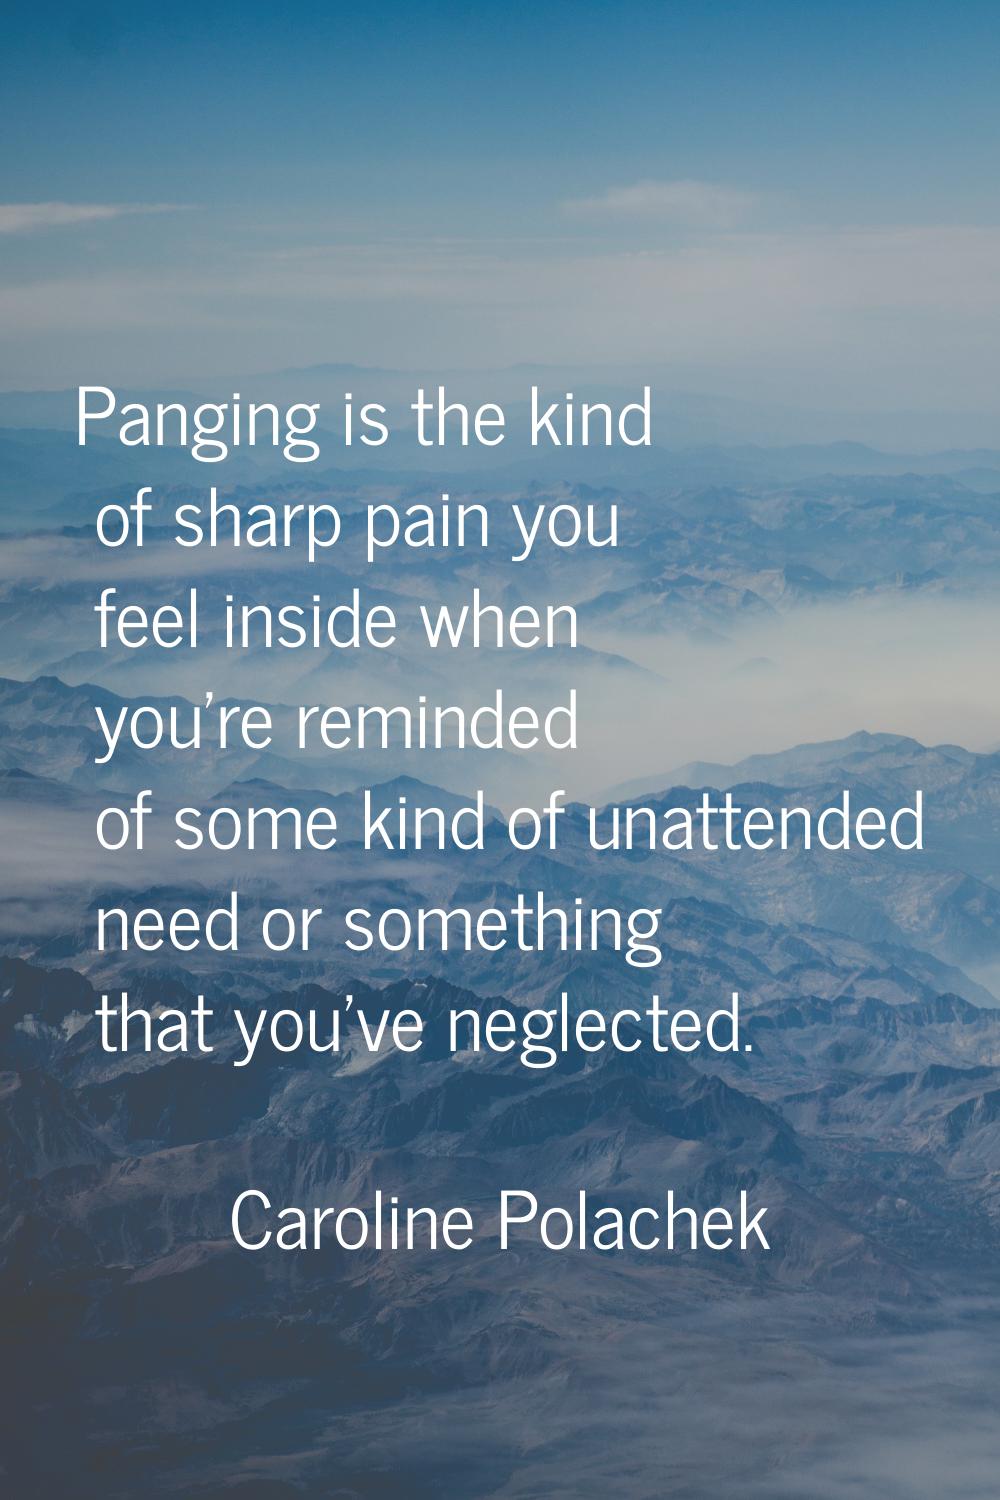 Panging is the kind of sharp pain you feel inside when you're reminded of some kind of unattended n